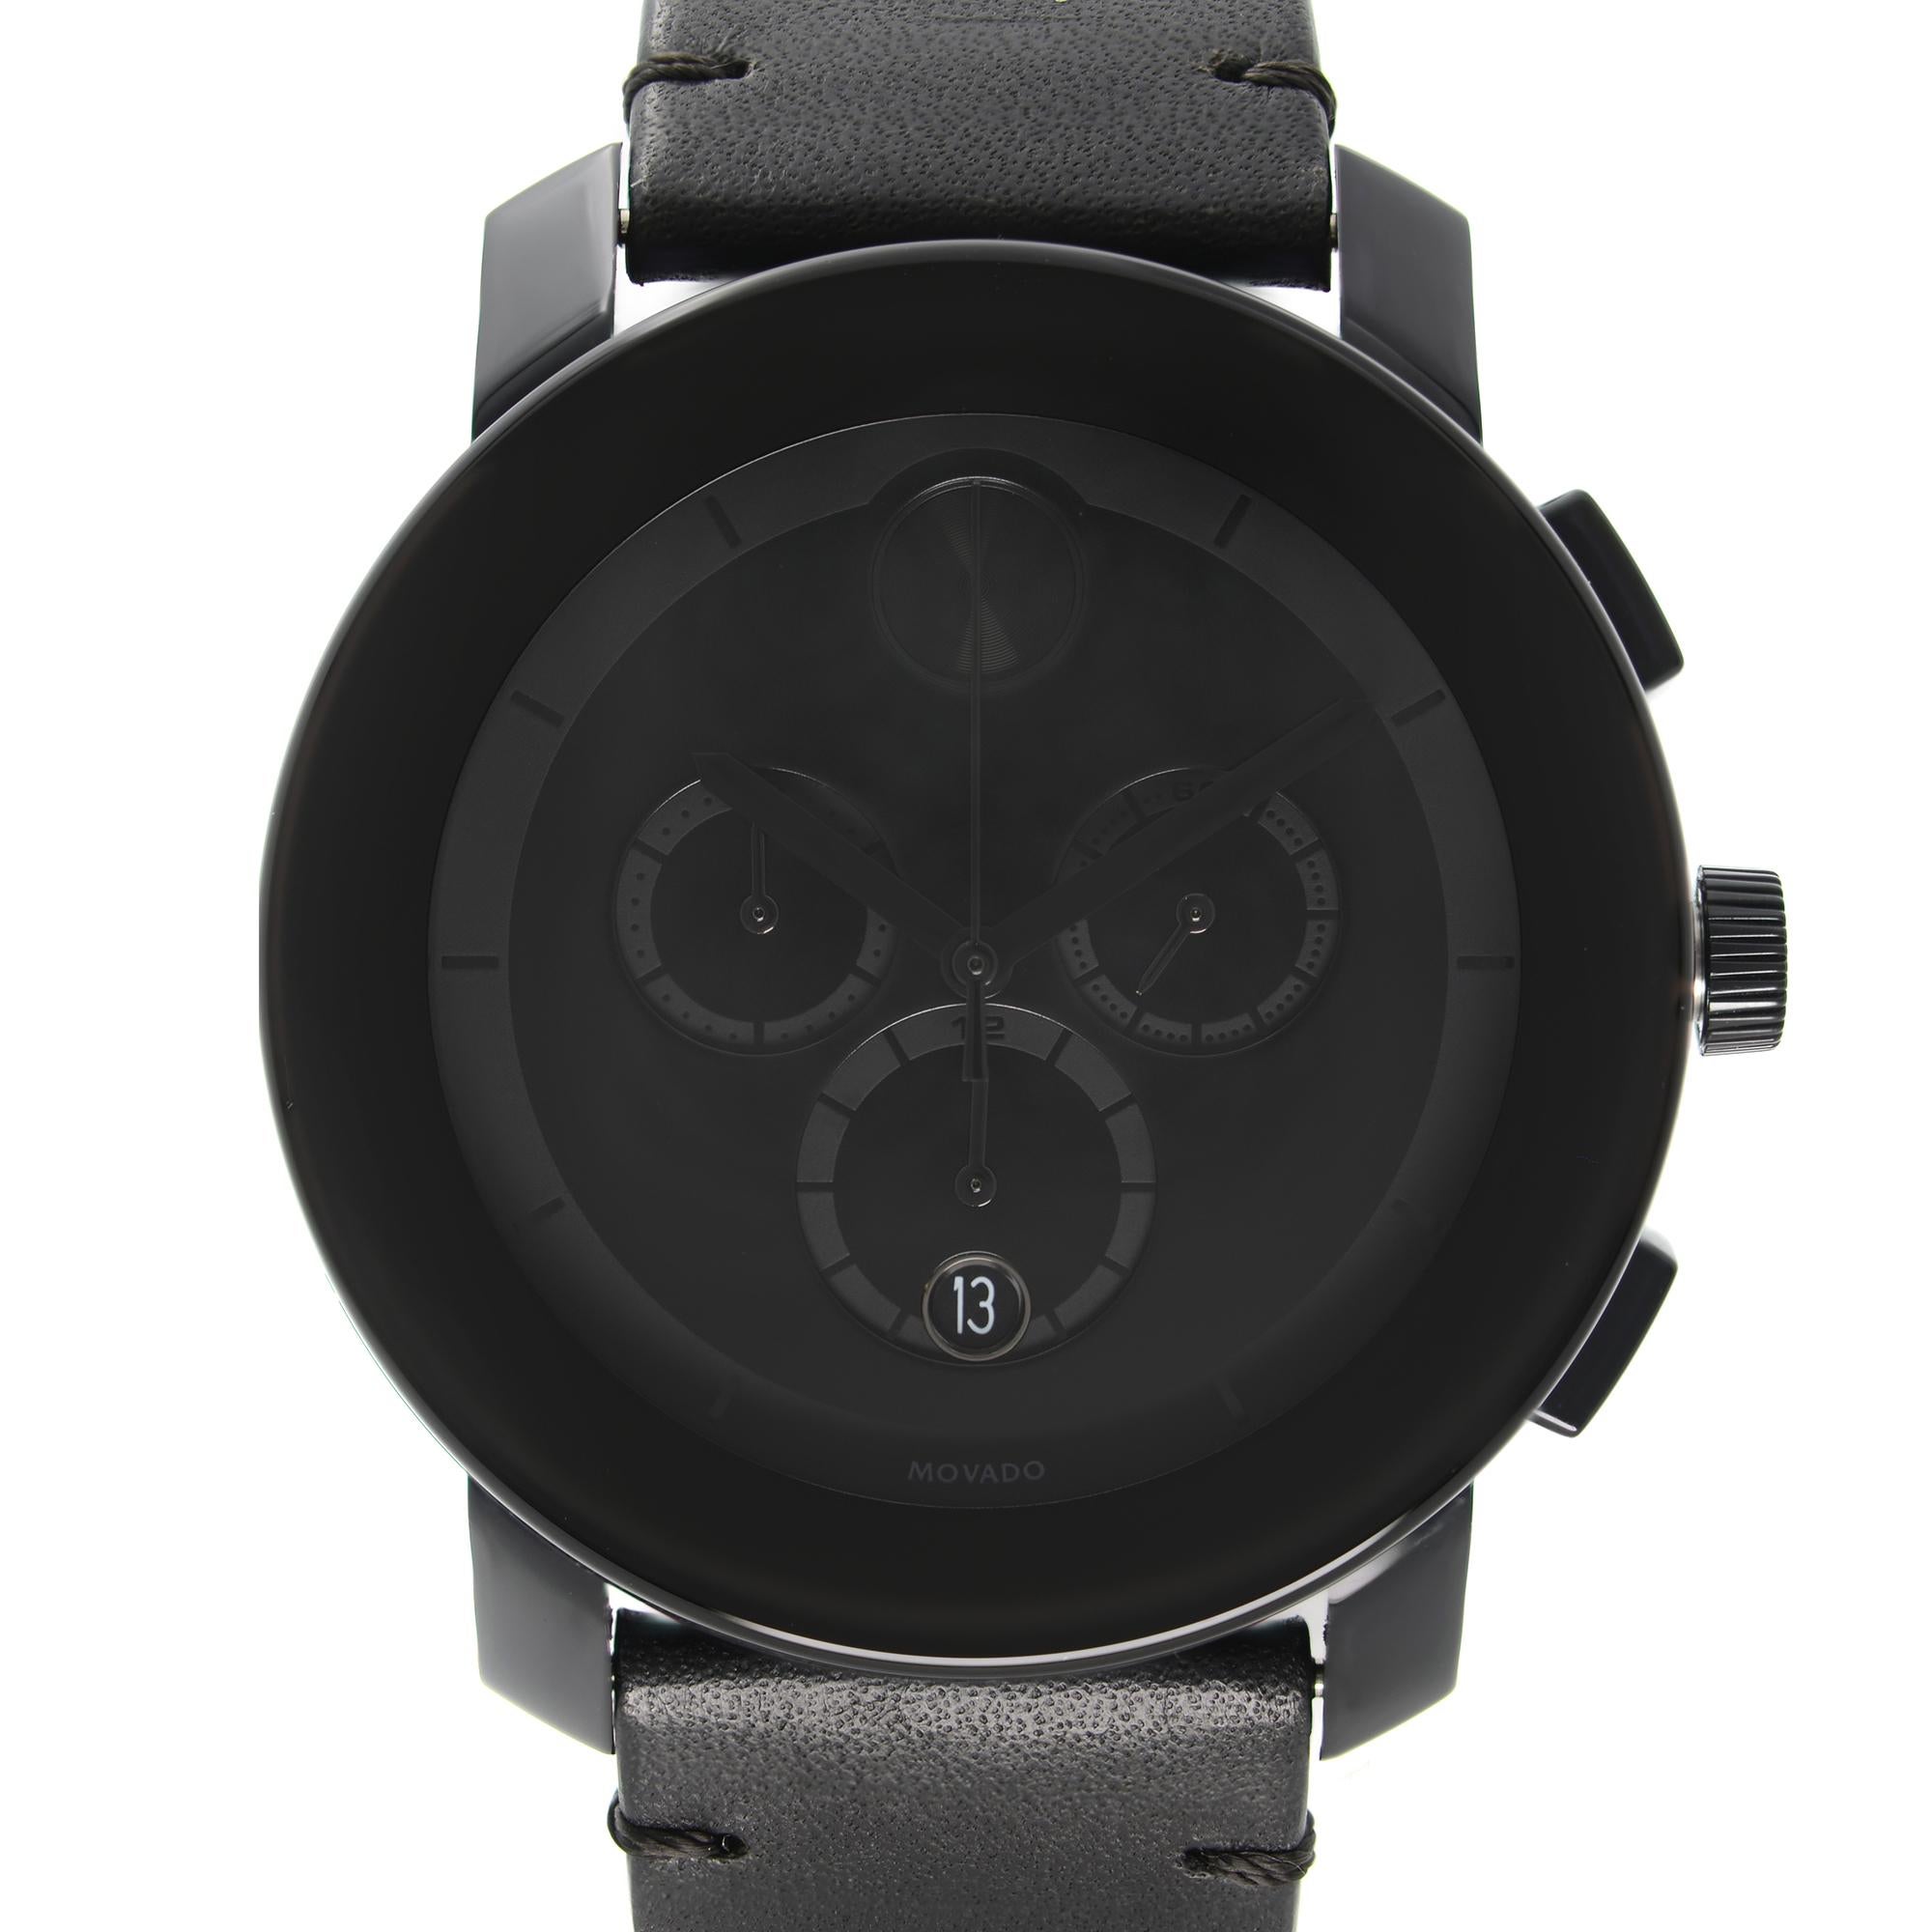 Pre-owned Movado Bold Chronograph Black Ion-Plated Steel Black Dial Quartz Men's Watch 3600337. The Watch Has Minor Scratches on the Case and Moderate Signs of Wear on the band. Comes with Original Box and Chronostore Authenticity Card. Covered by